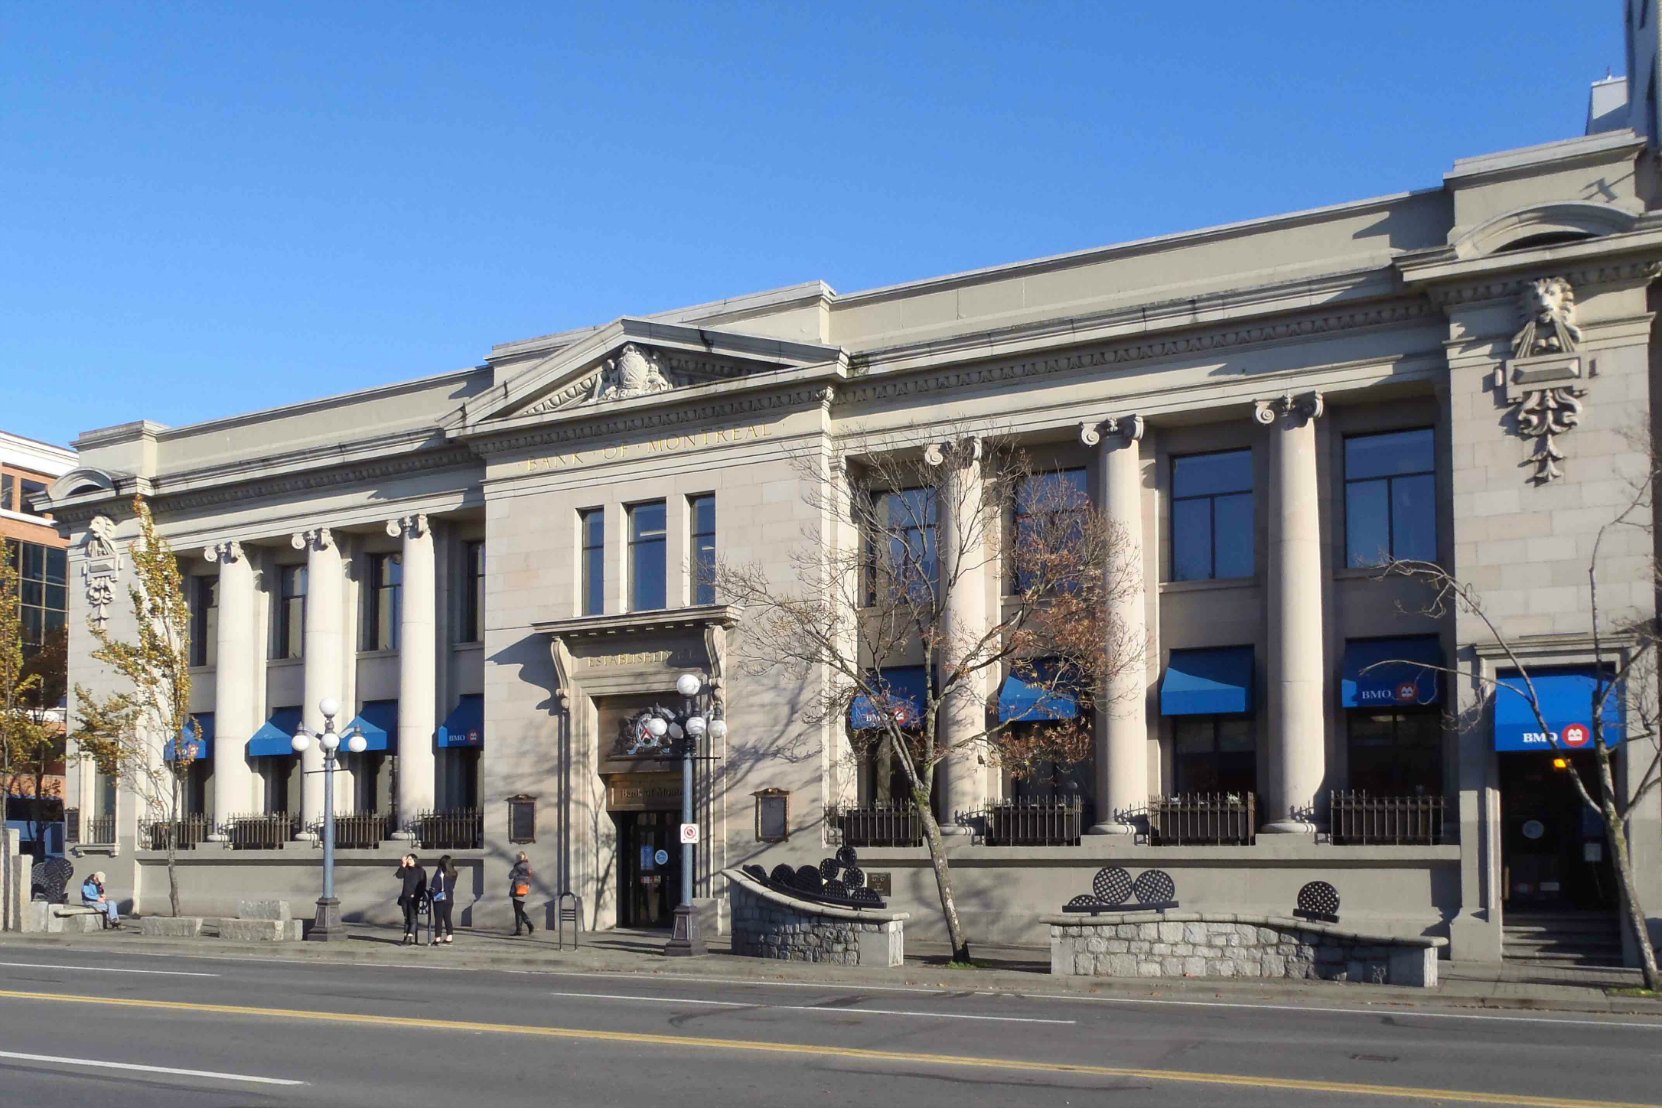 Bank of Montreal, 1225 Douglas Street. Built in 1907 by architect Francis Rattenbury for the Merchants Bank of Canada